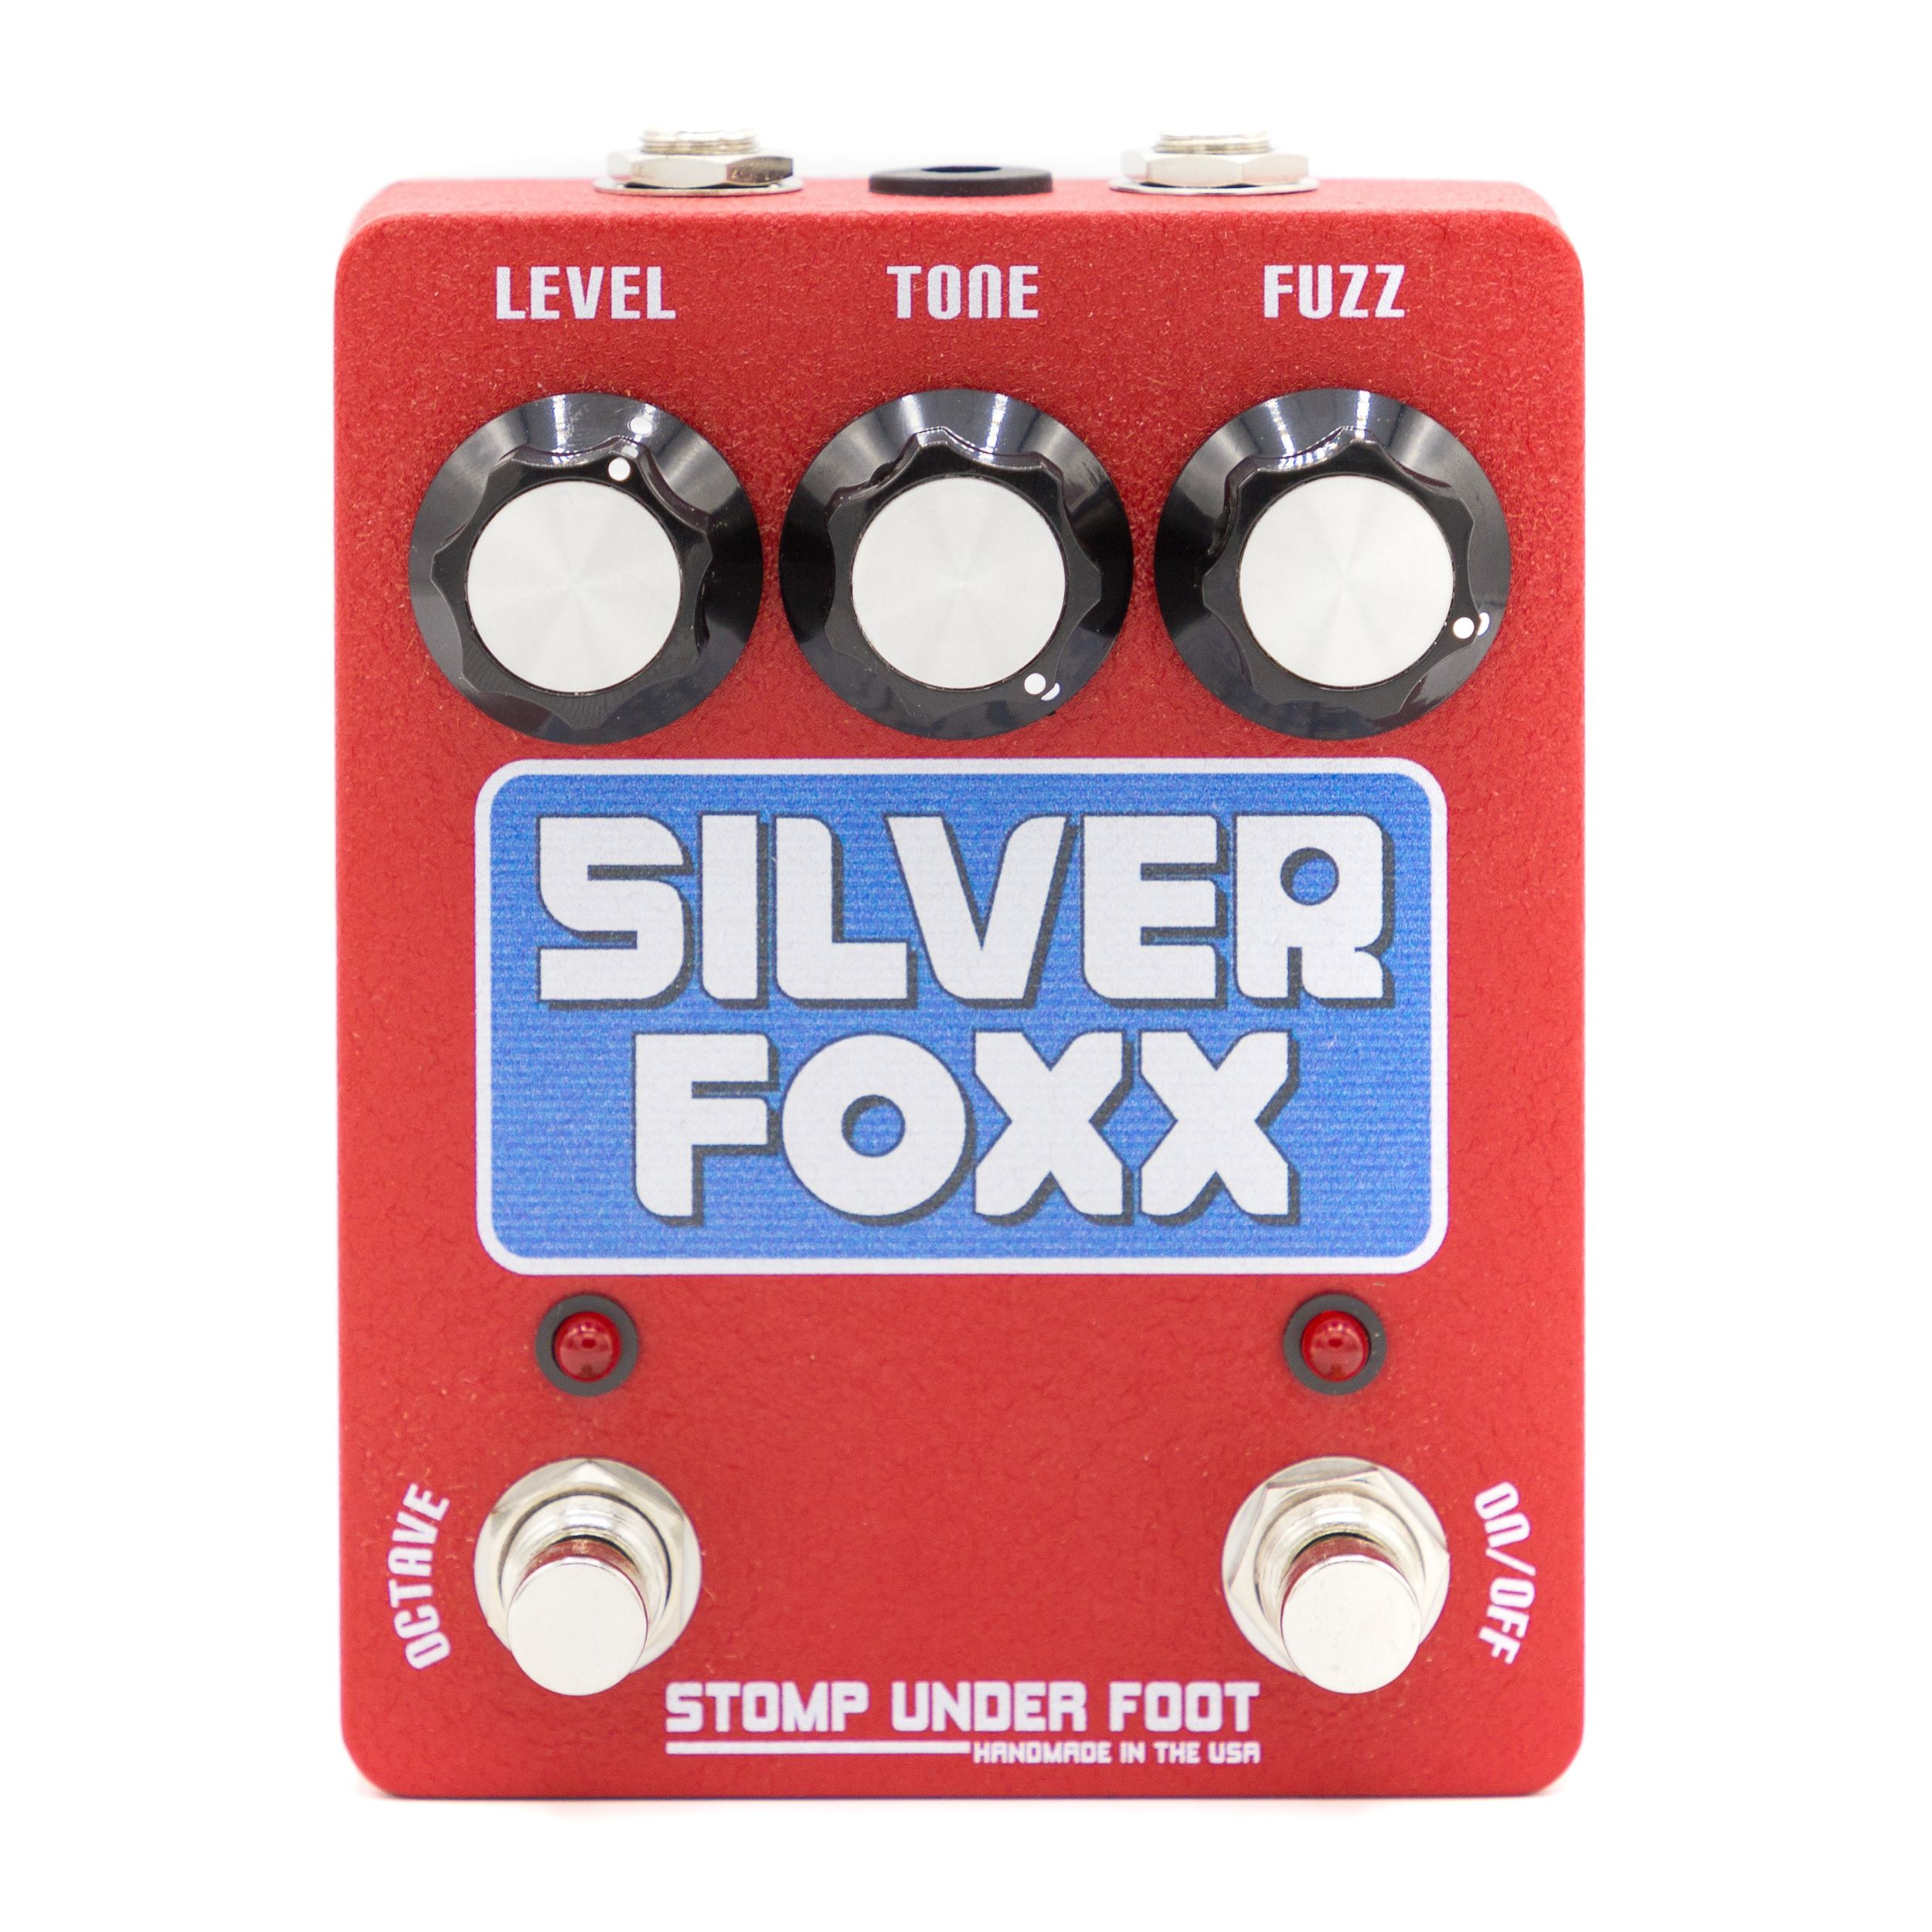 Stomp Under Foot Introduces Silver Foxx and Cherry Bomb